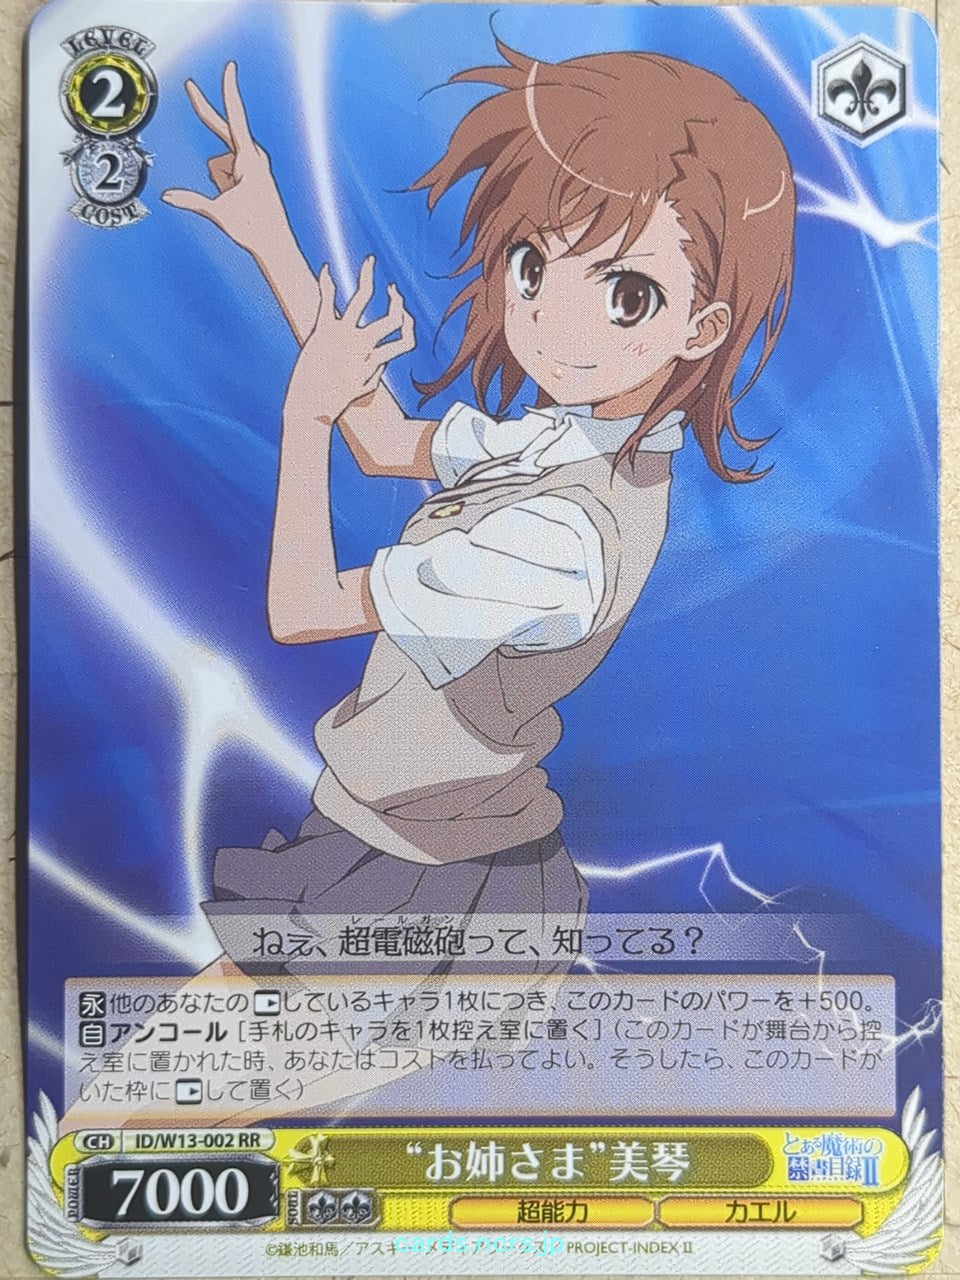 Weiss Schwarz A Certain Magical Index -Mikoto Misaka-   Trading Card ID/W13-002RR